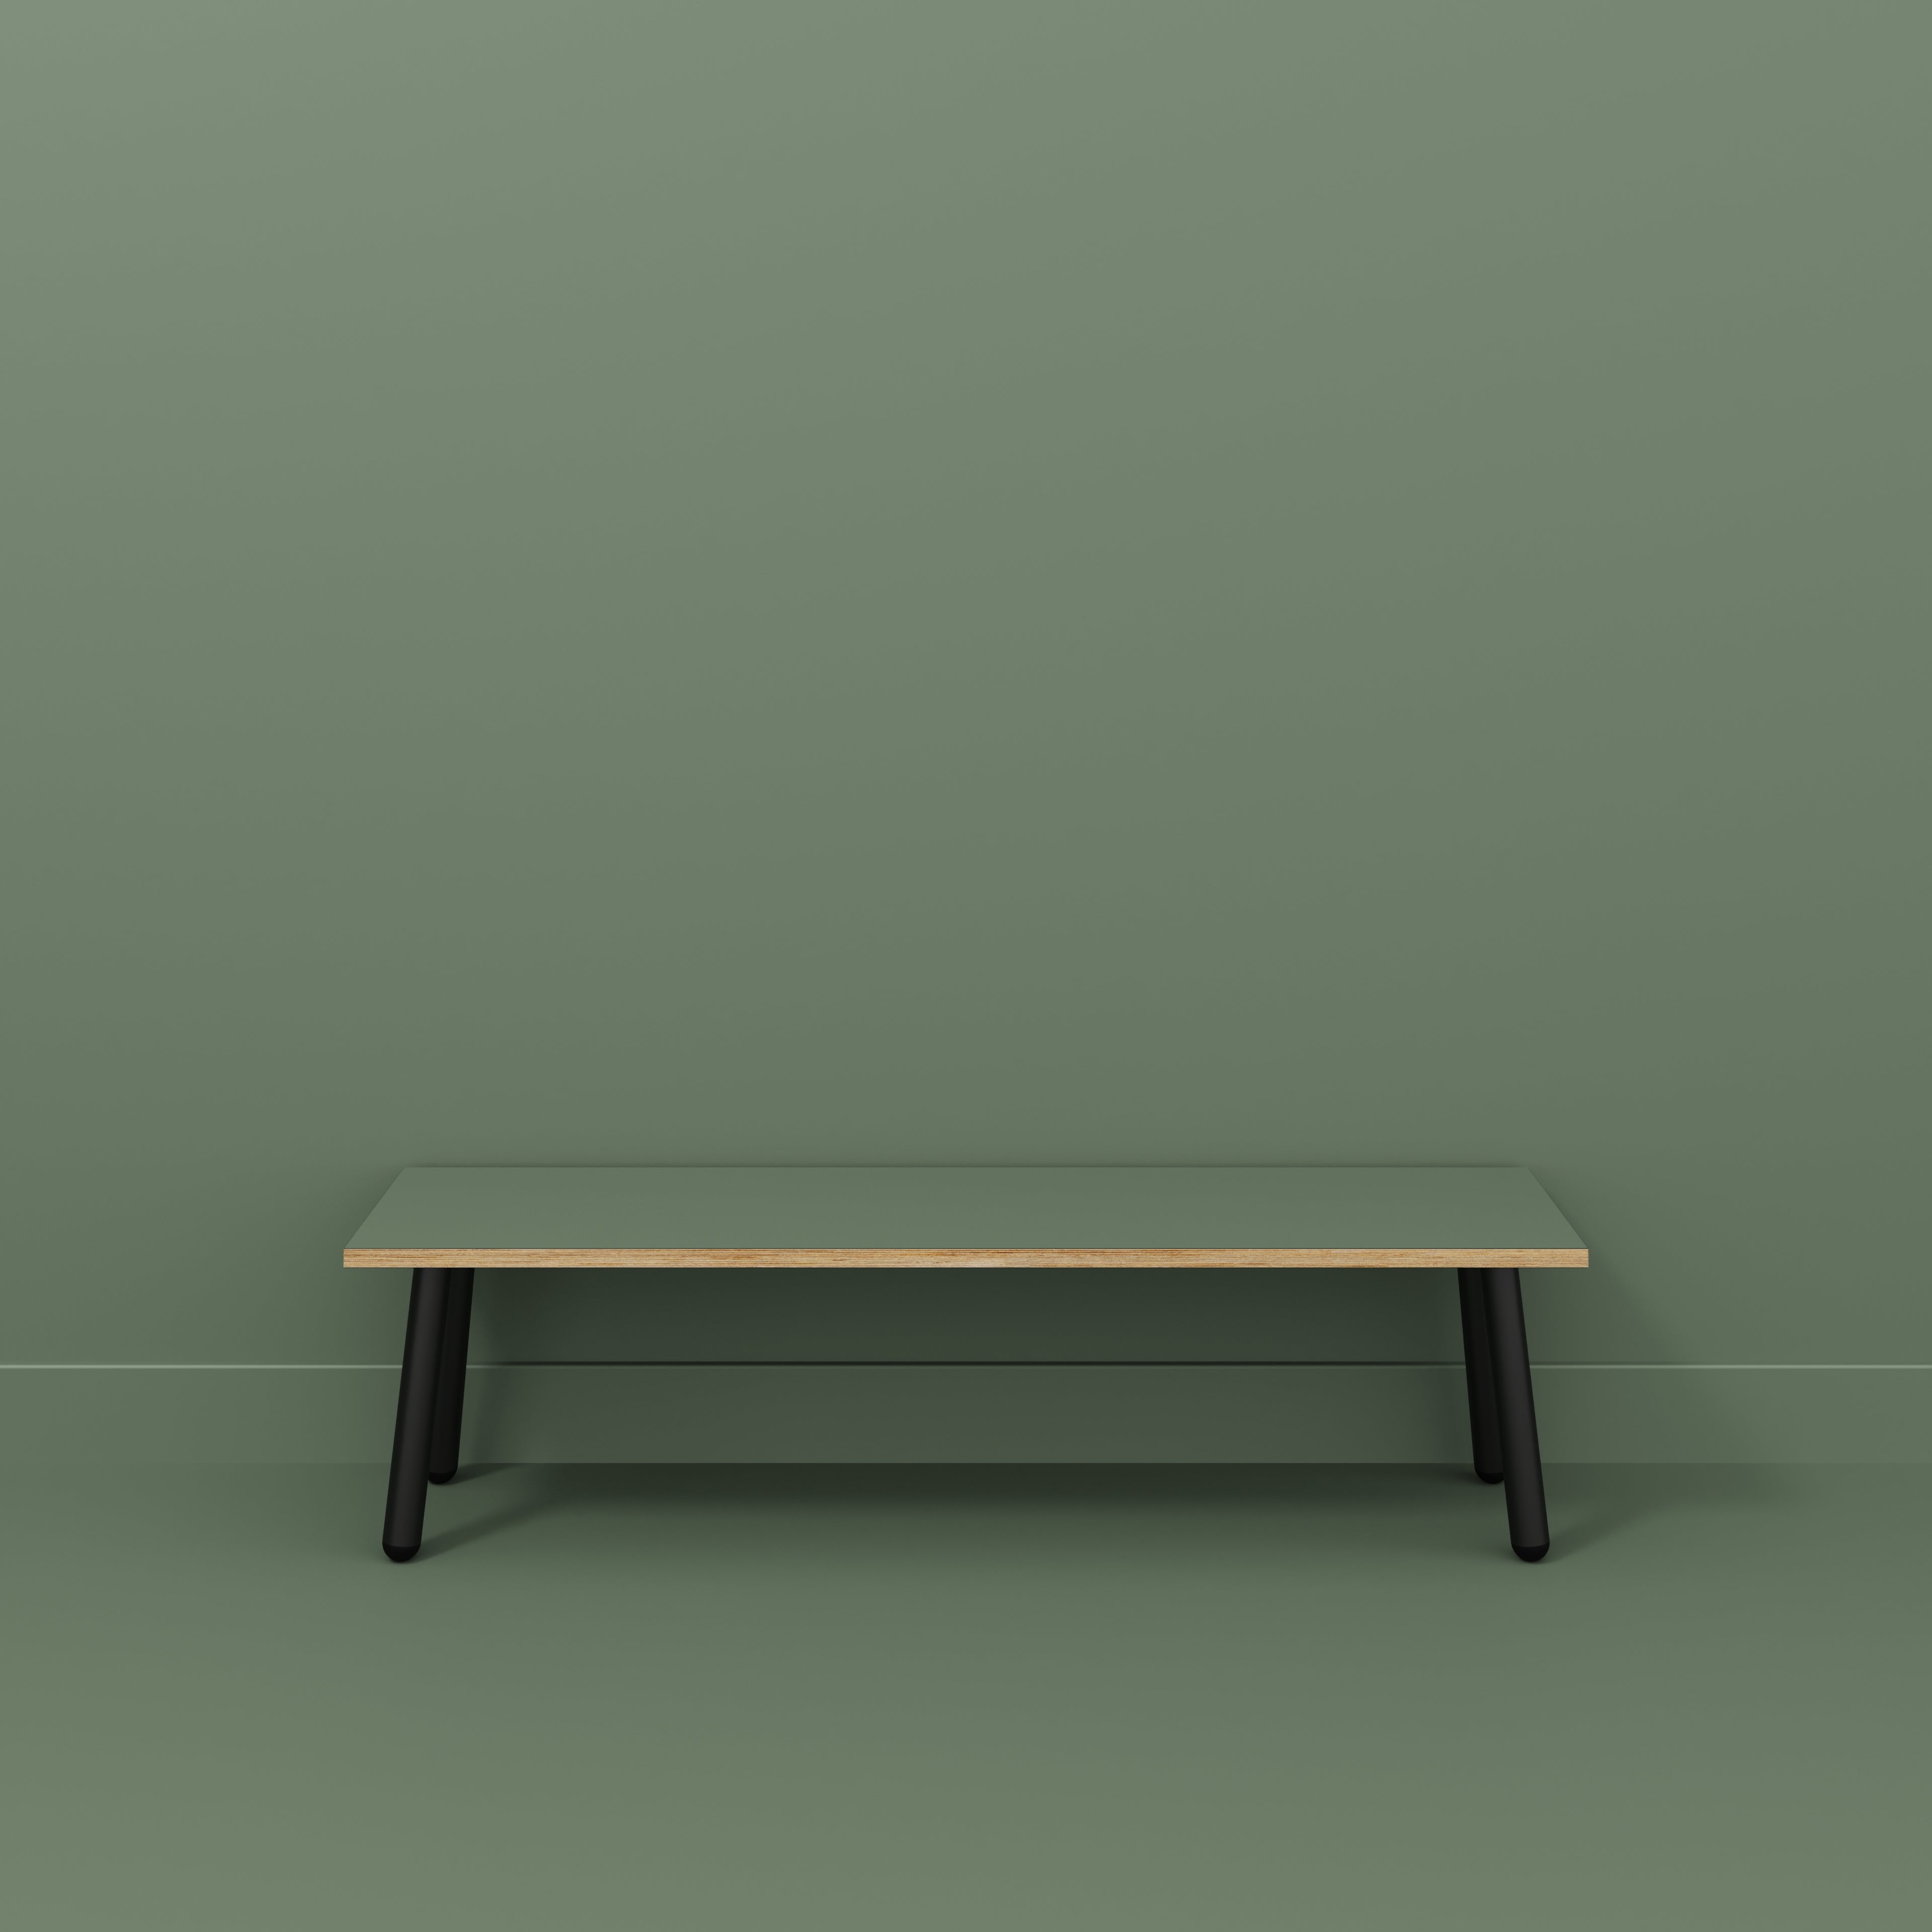 Bench Seat with Black Round Single Pin Legs - Formica Green Slate - 1600(w) x 400(d)